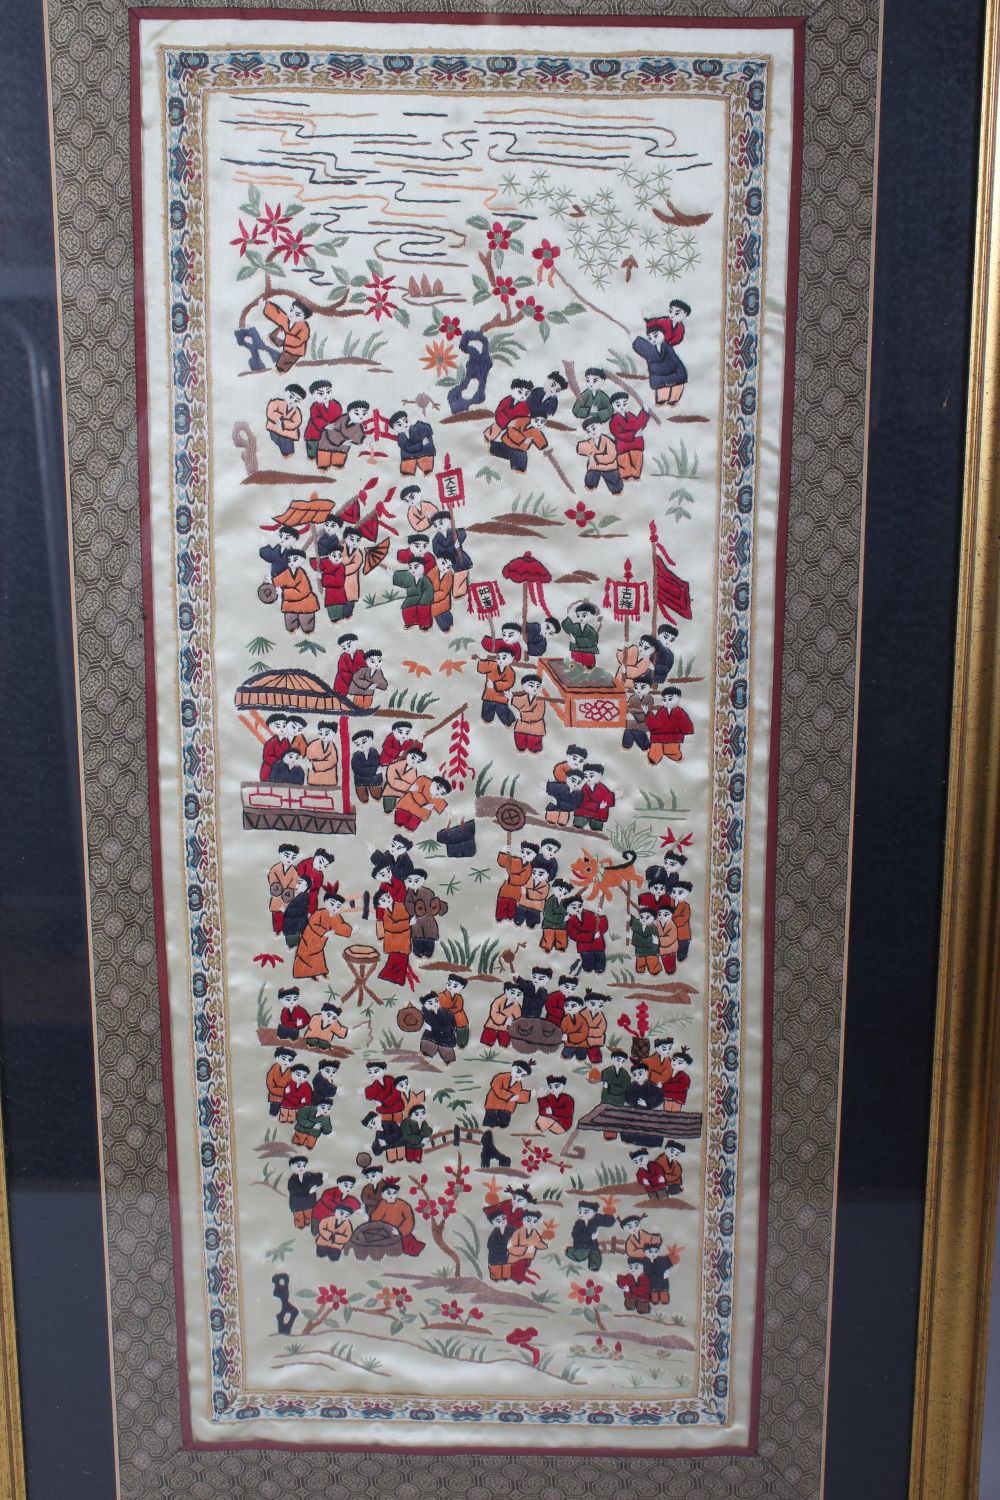 A LATE 19TH / EARLY 20TH CENTURY CHINESE EMBROIDERED SILK OF BOYS, the framed silk work depicting - Image 2 of 7